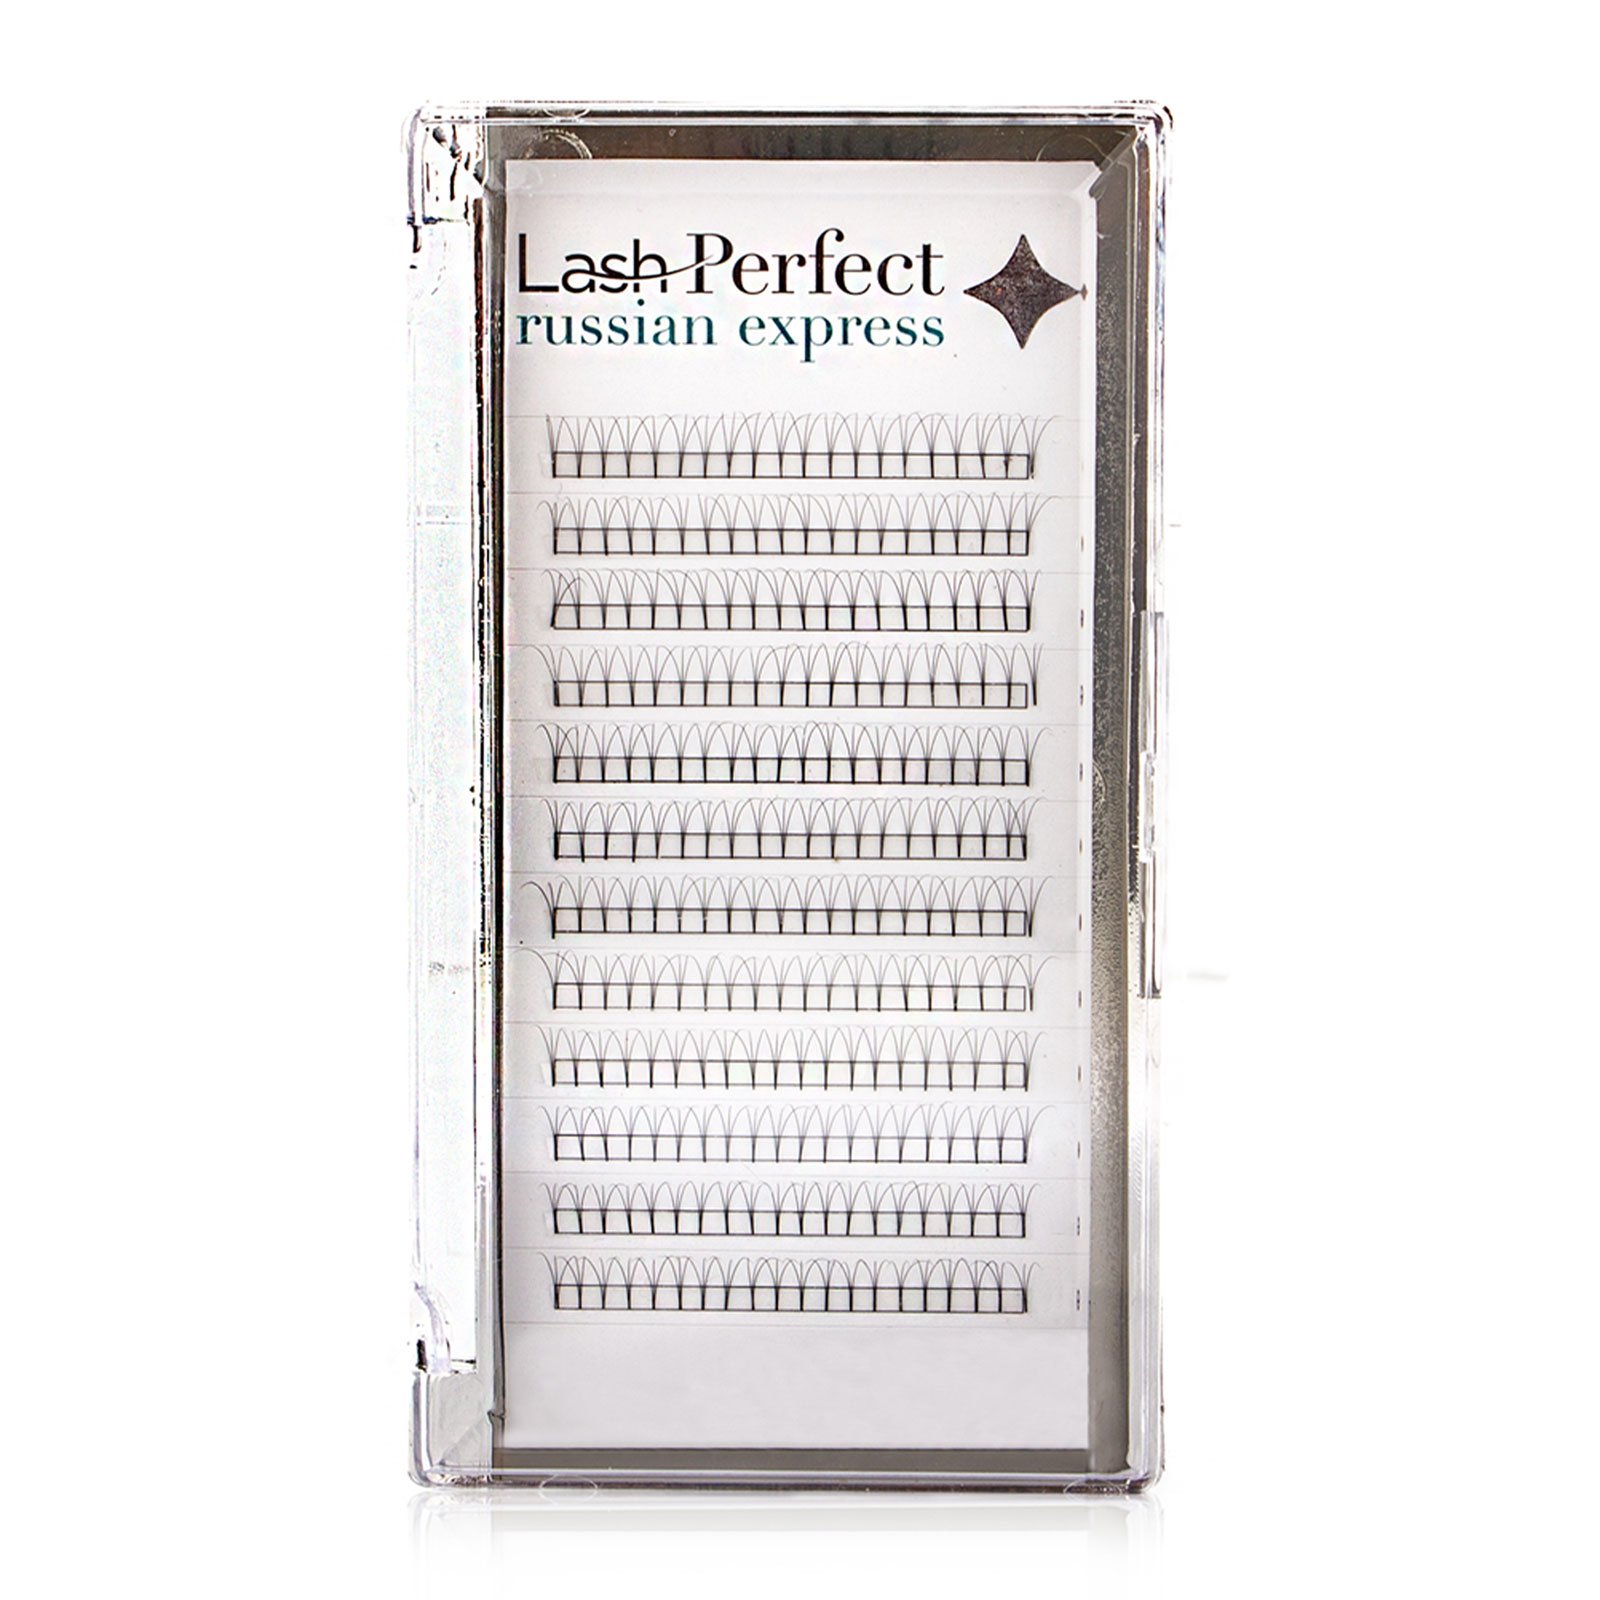 Lash Perfect Russian Express Lashes C Curl 3D 0.07 11Mm (12 Lines)